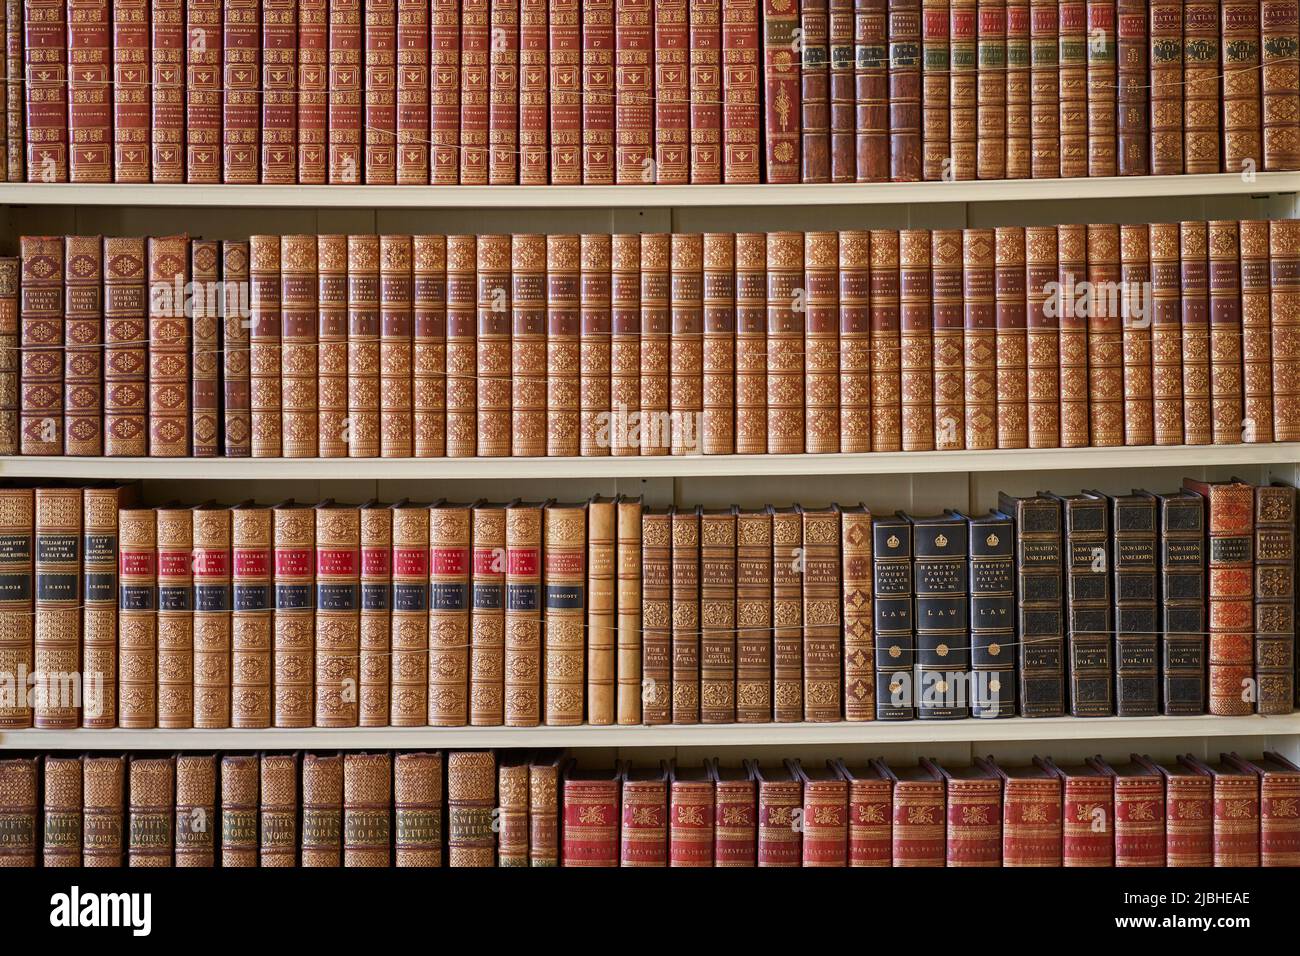 Bookshelves filled with old leather bound books Stock Photo